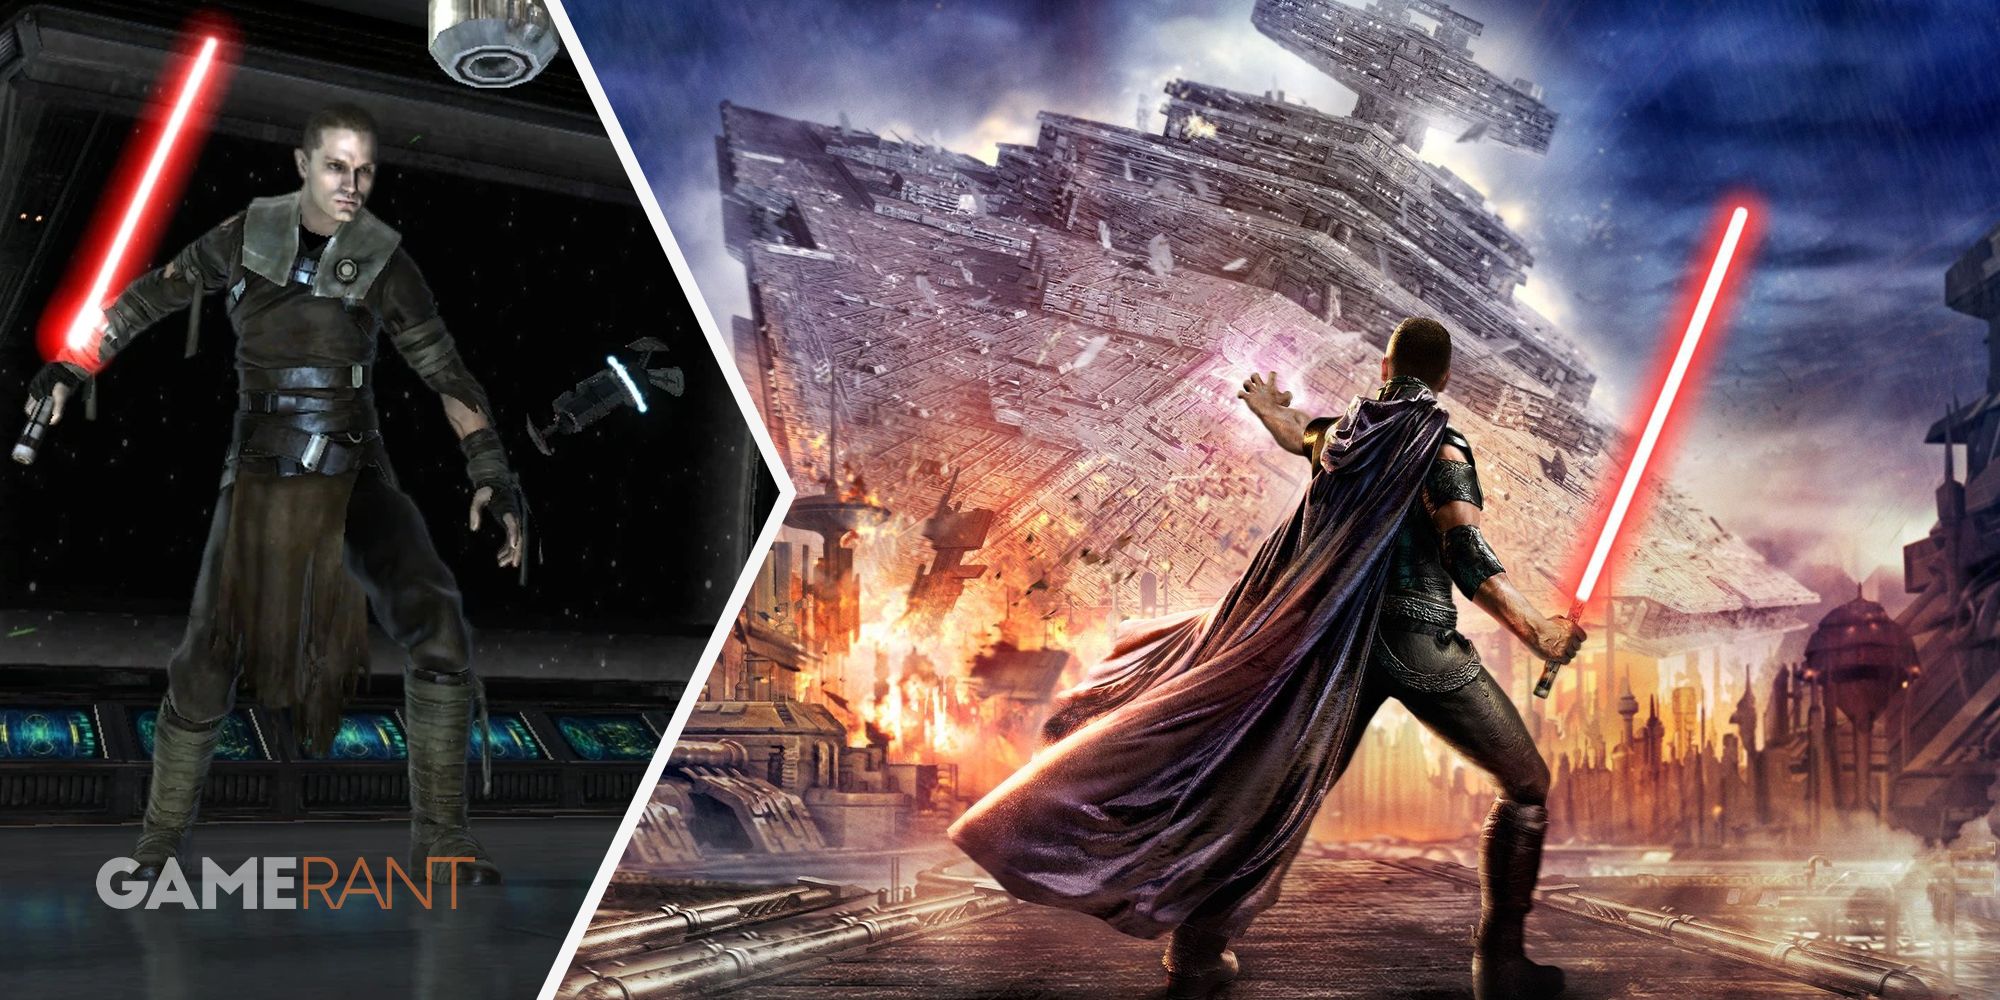 Sith character in Star Wars: The Force Unleashed on left, character force pushing a star destroyer to crash on right